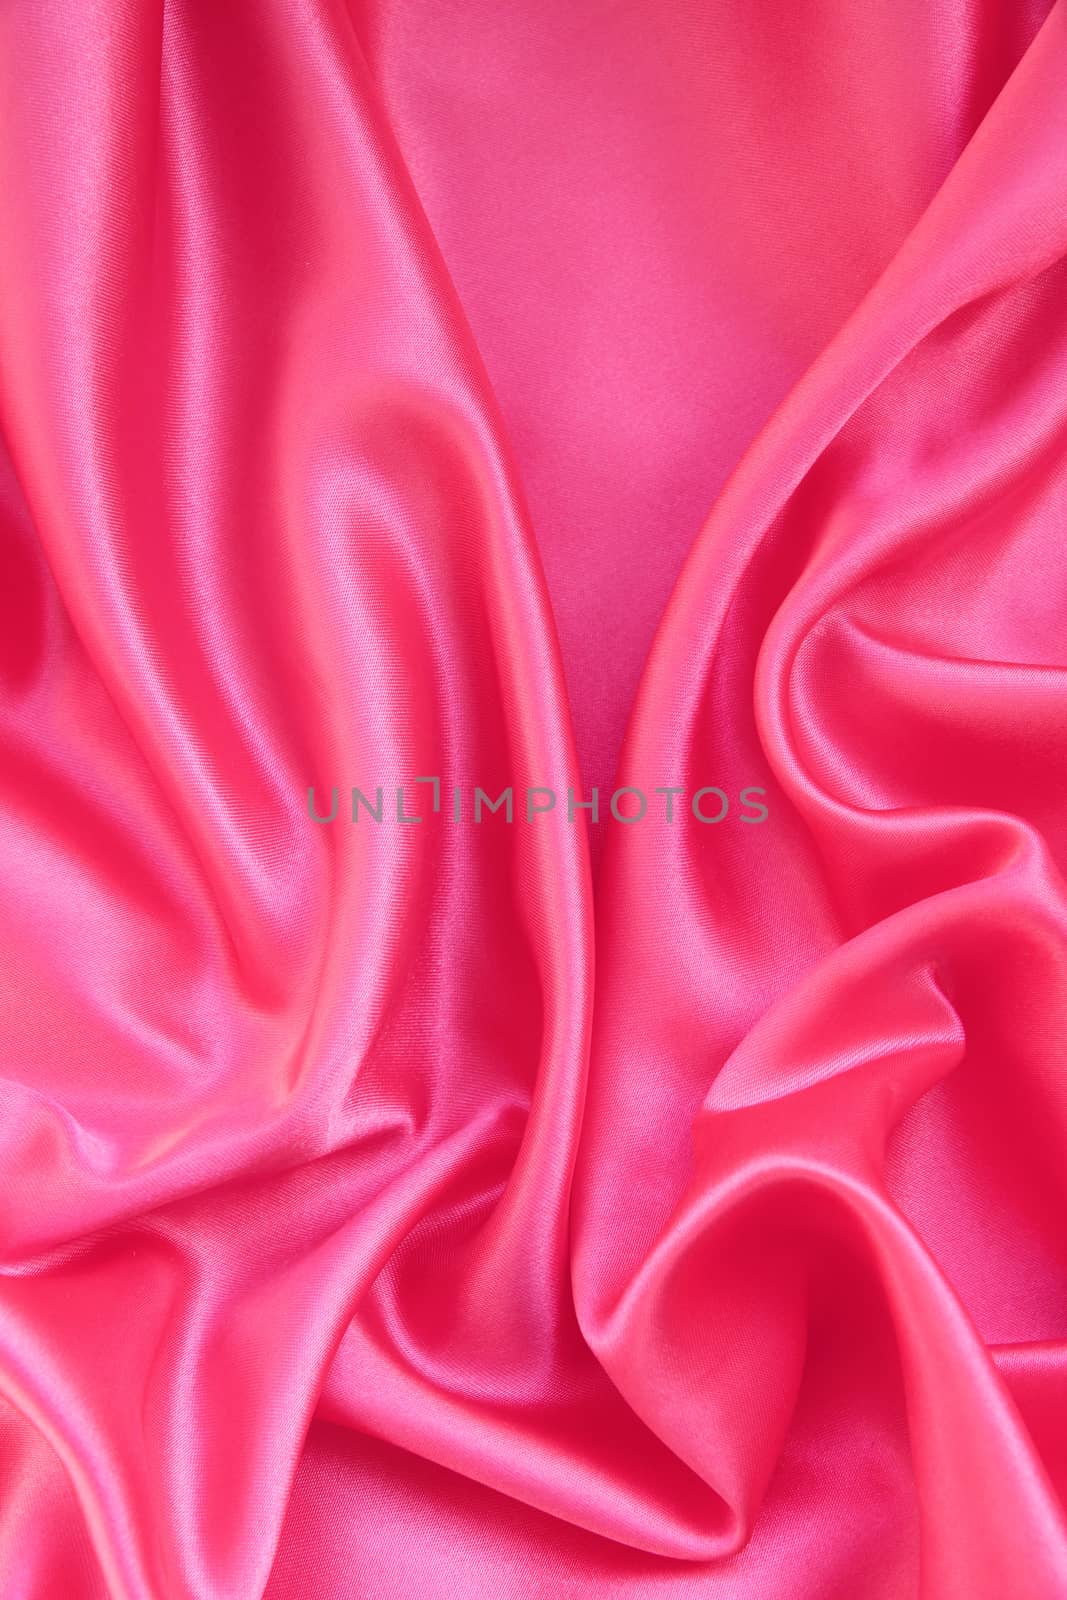 Smooth elegant pink silk or satin can use as background 